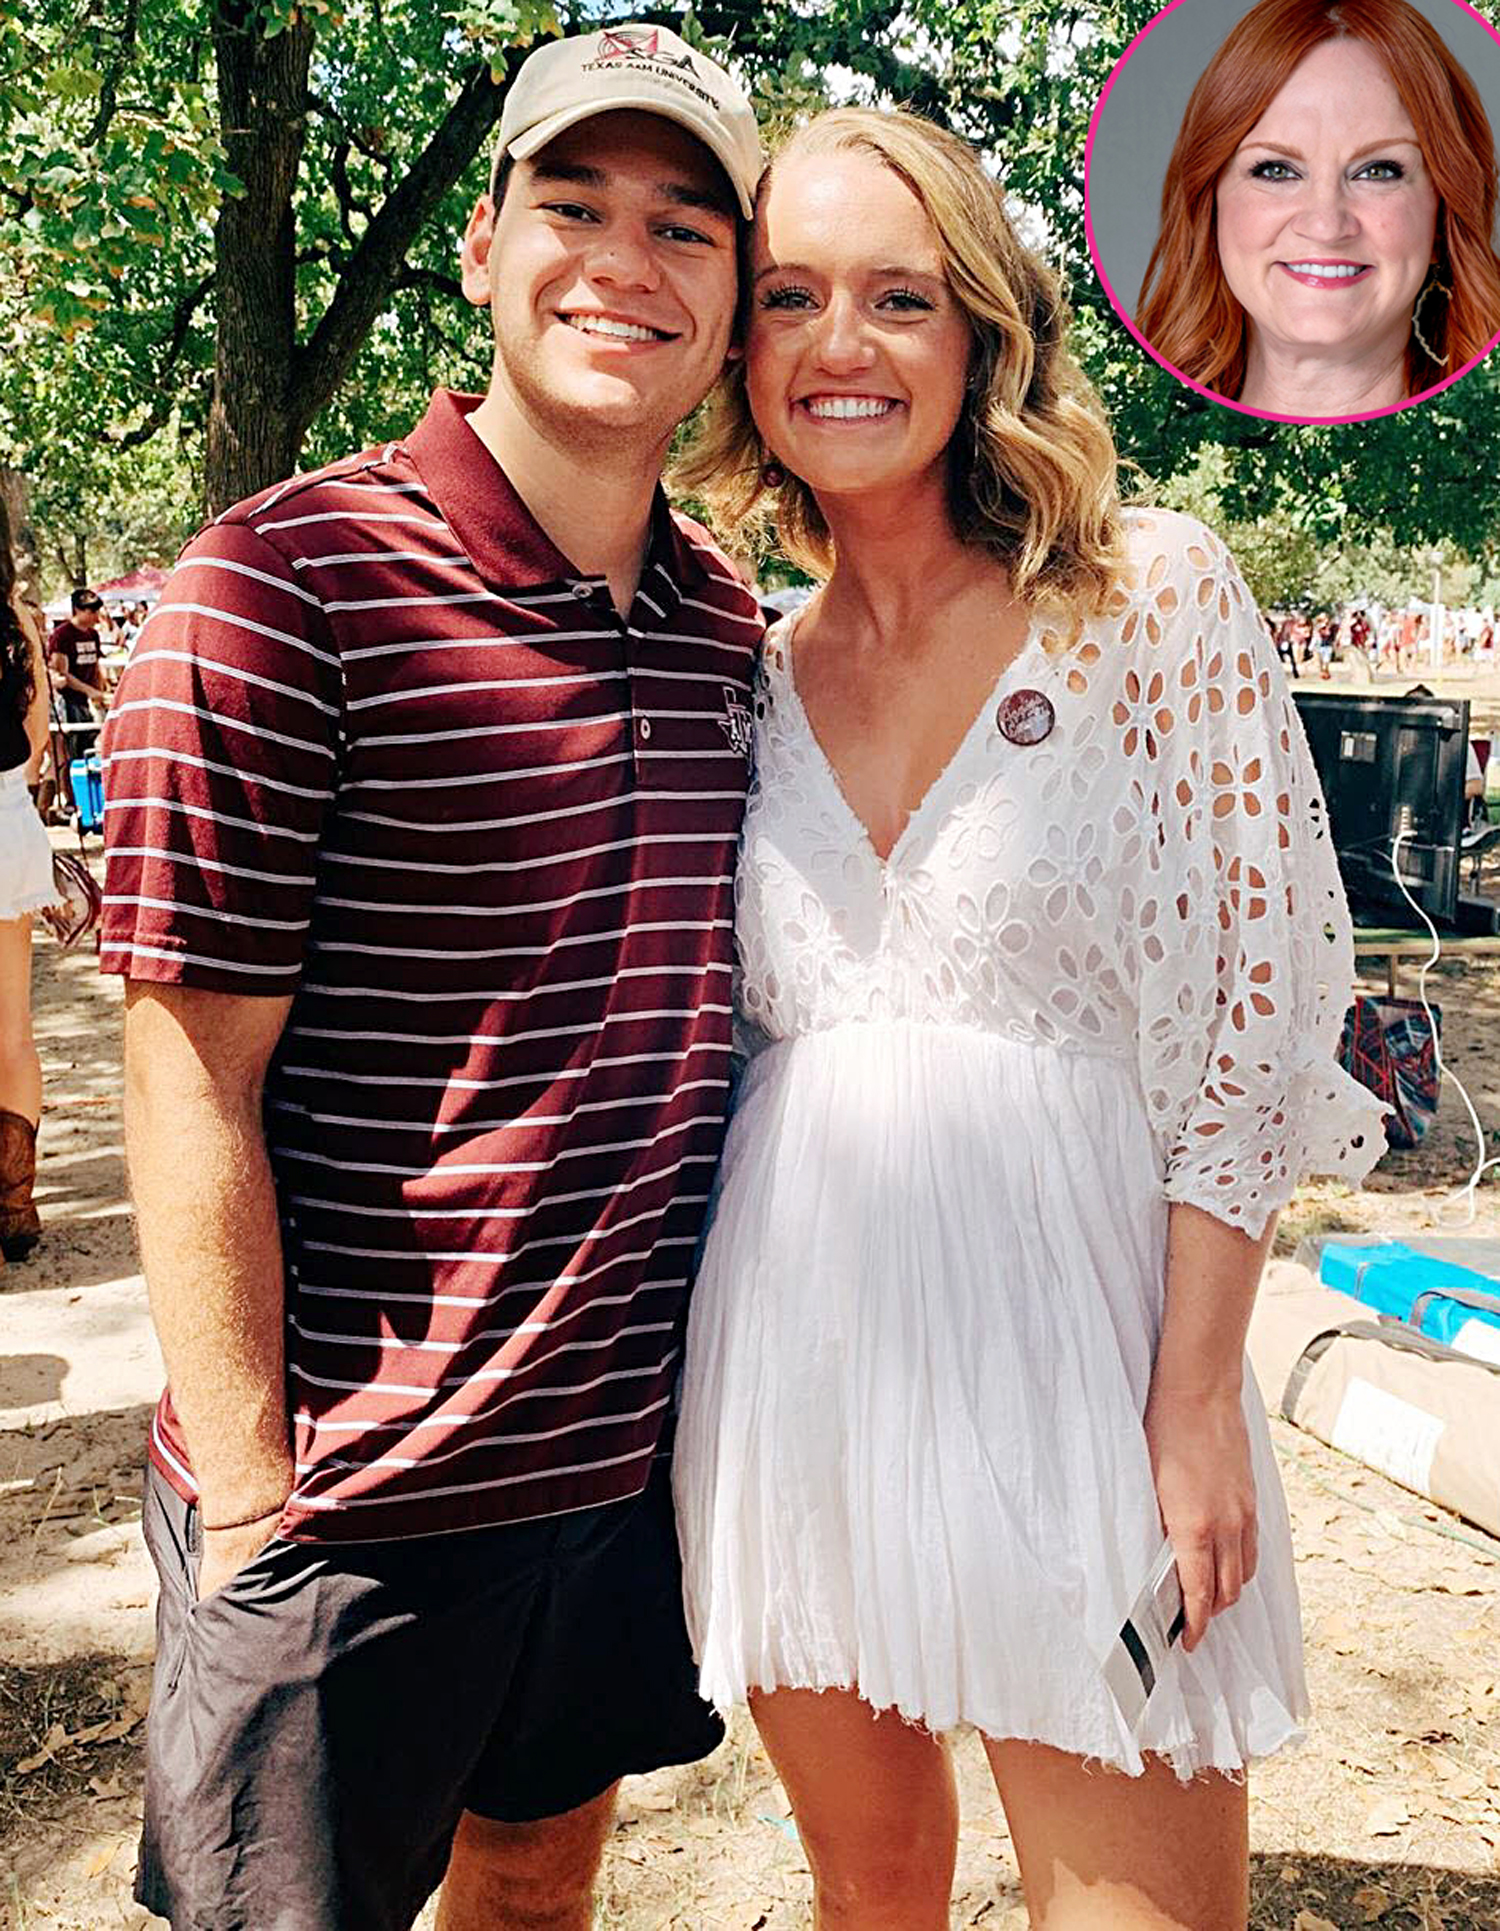 Pioneer Woman Ree Drummond Spends Mother's Day with Sons Todd and